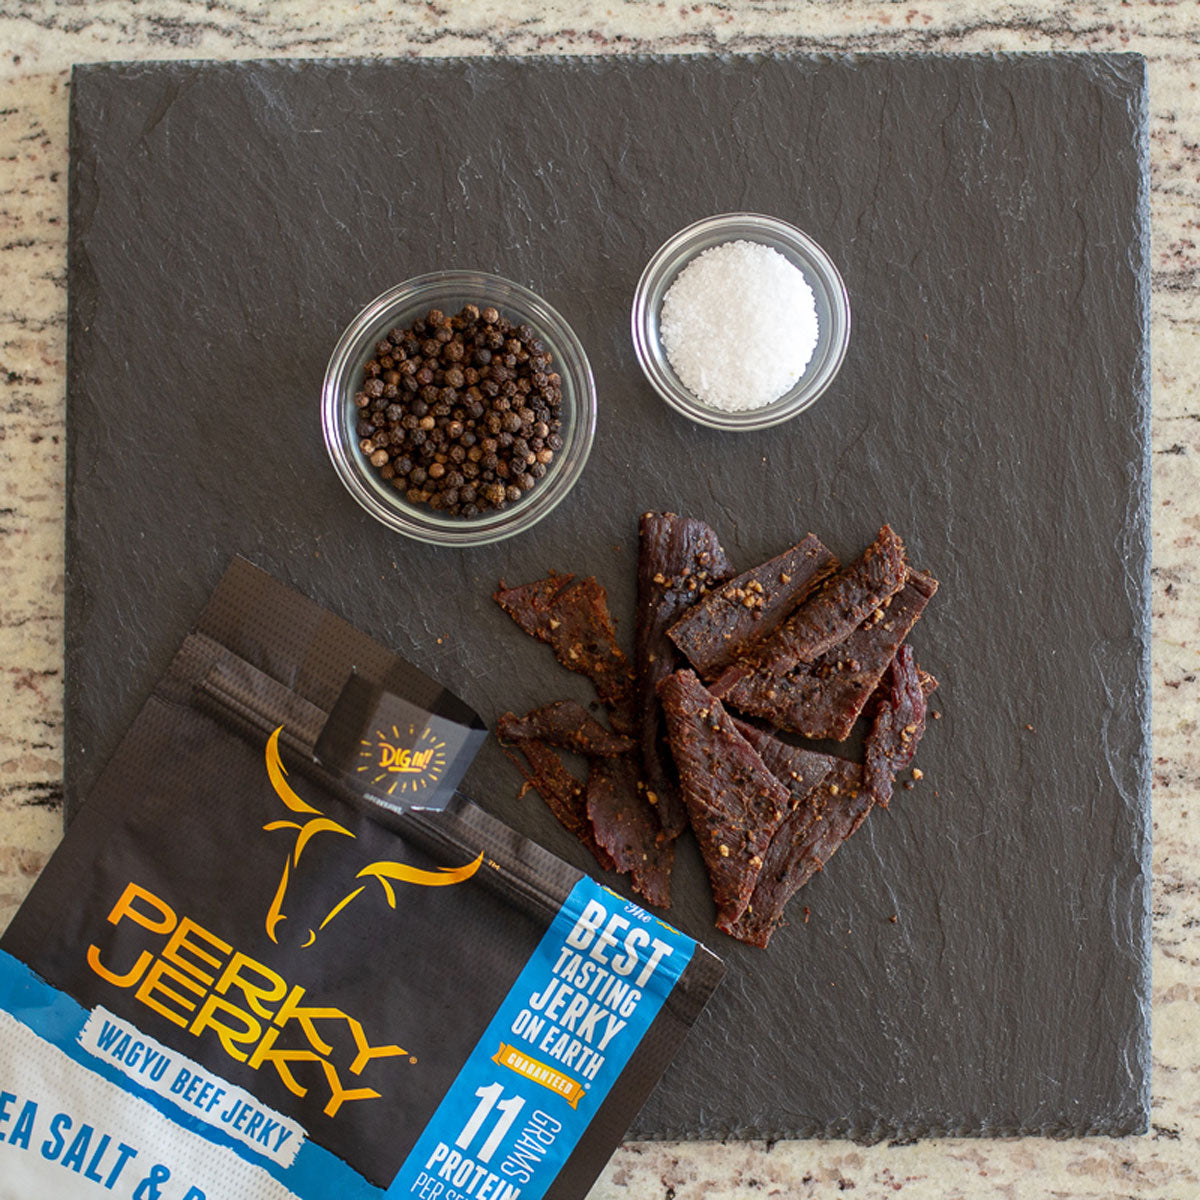 Sea Salt and Pepper Wagyu Beef Jerky spice